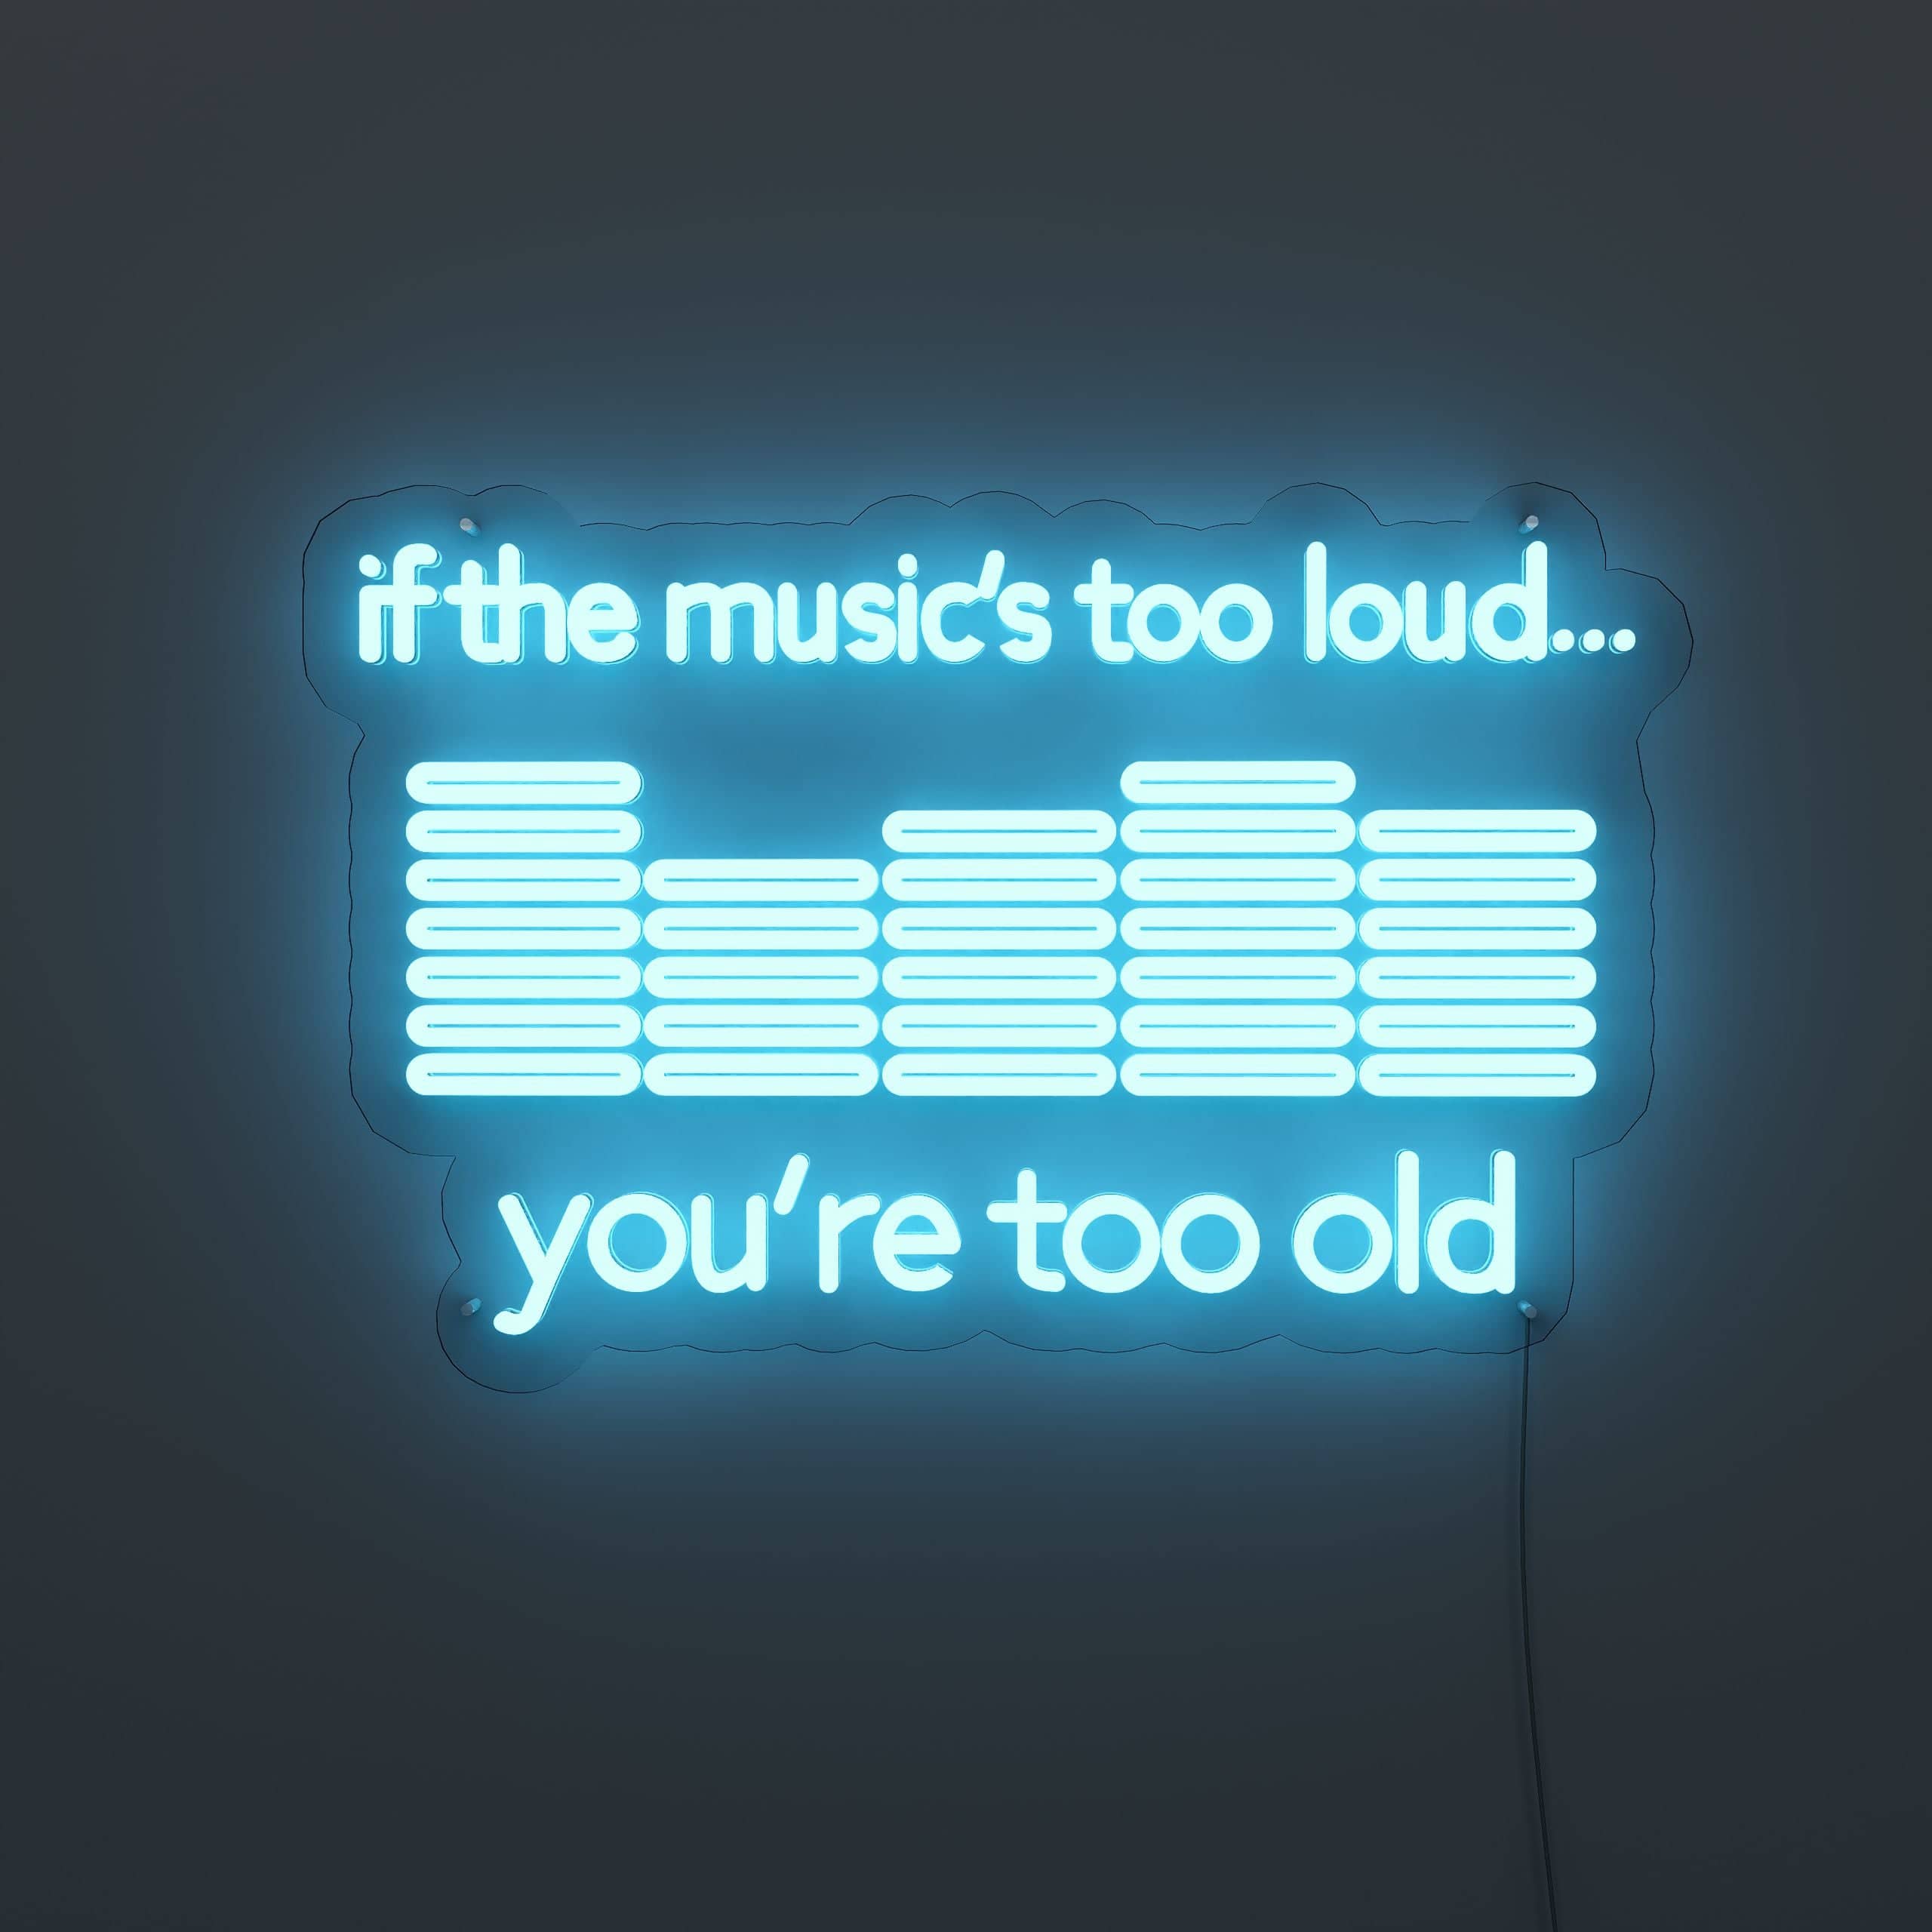 embrace-the-loud-music-neon-sign-lite